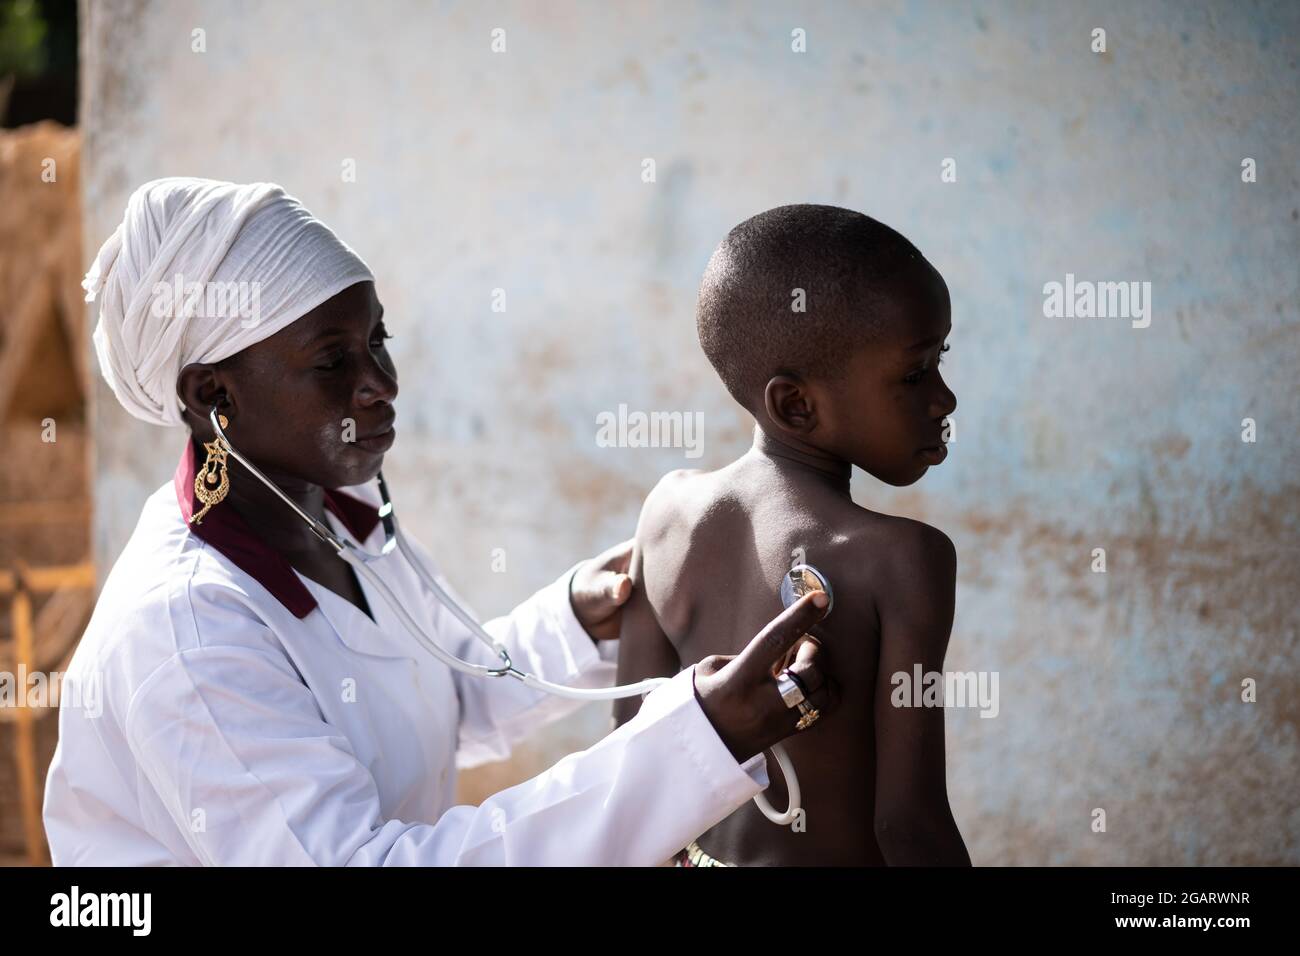 In this image, an attentive black African doctor is examinating the respiratory and heart function of a small toddler with a stethoscope Stock Photo